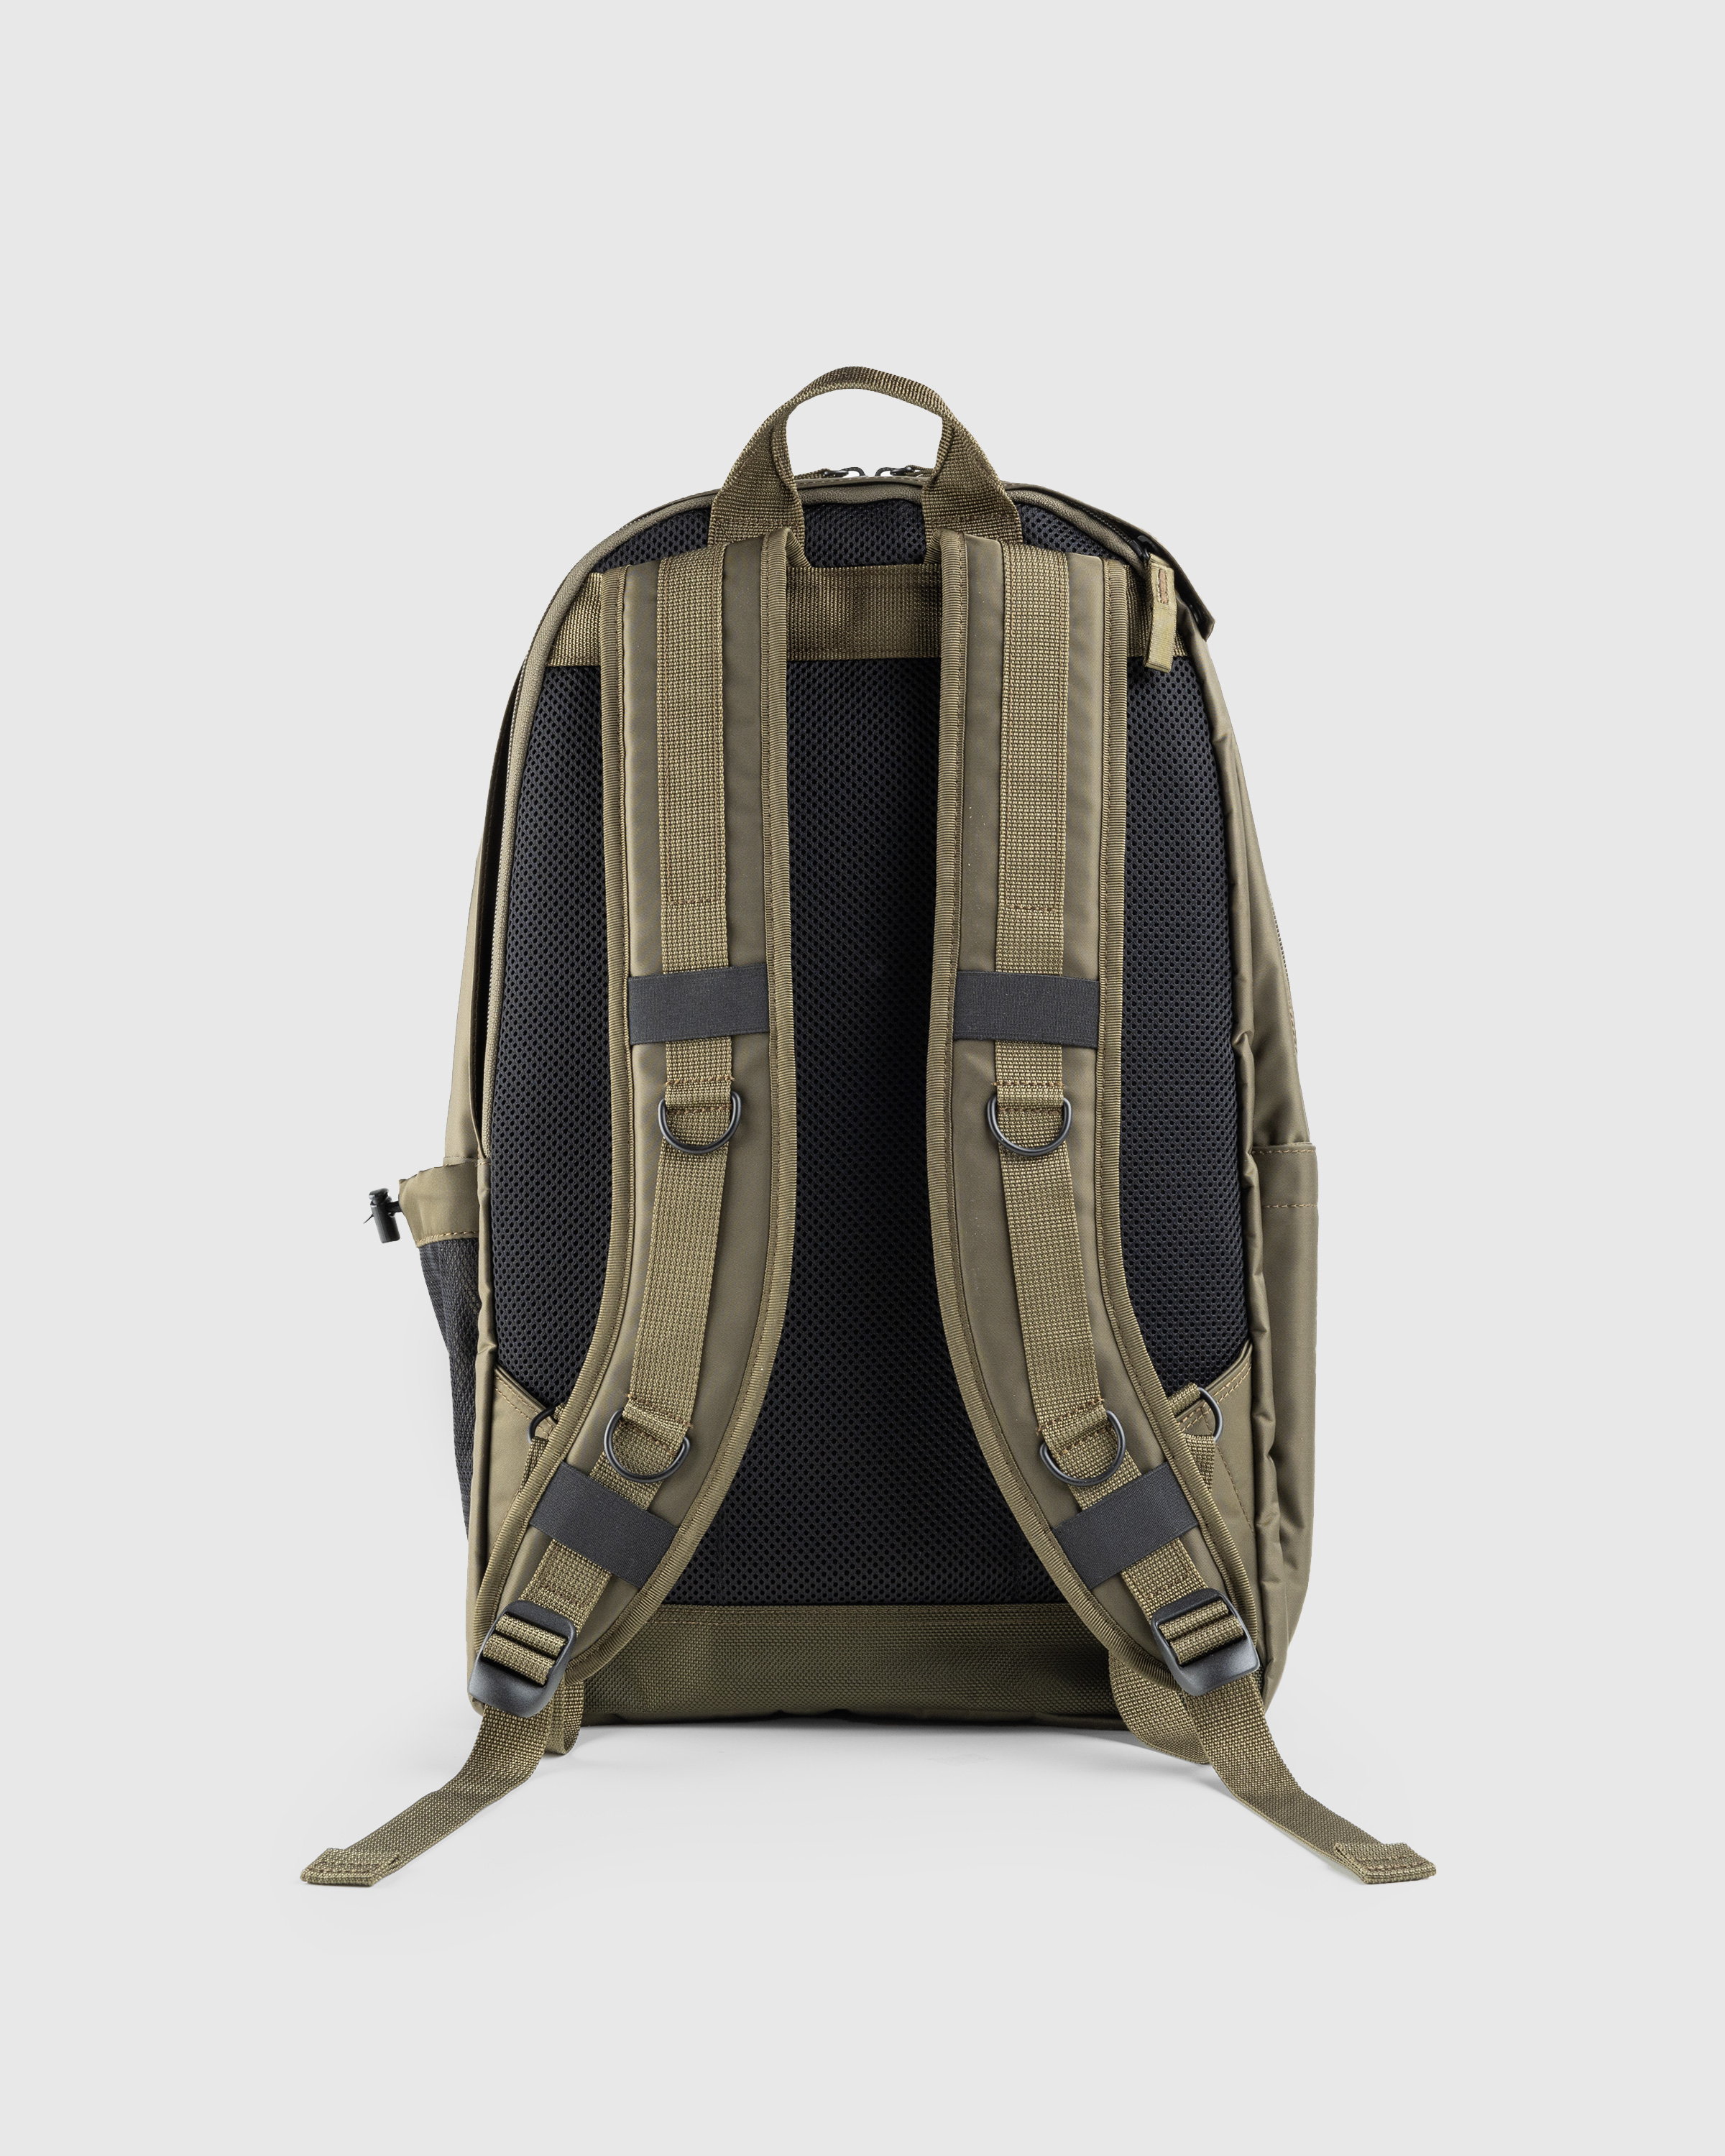 Porter-Yoshida & Co. – POTR Ride Daypack With Bicycle Chain Olive Green - Backpacks - Green - Image 3